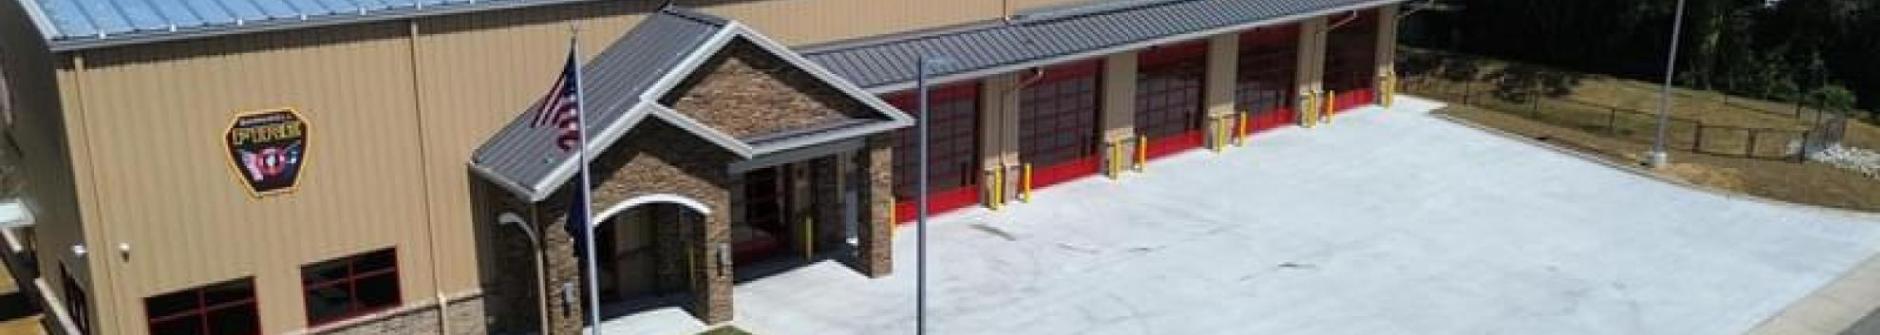 Photo of new fire station